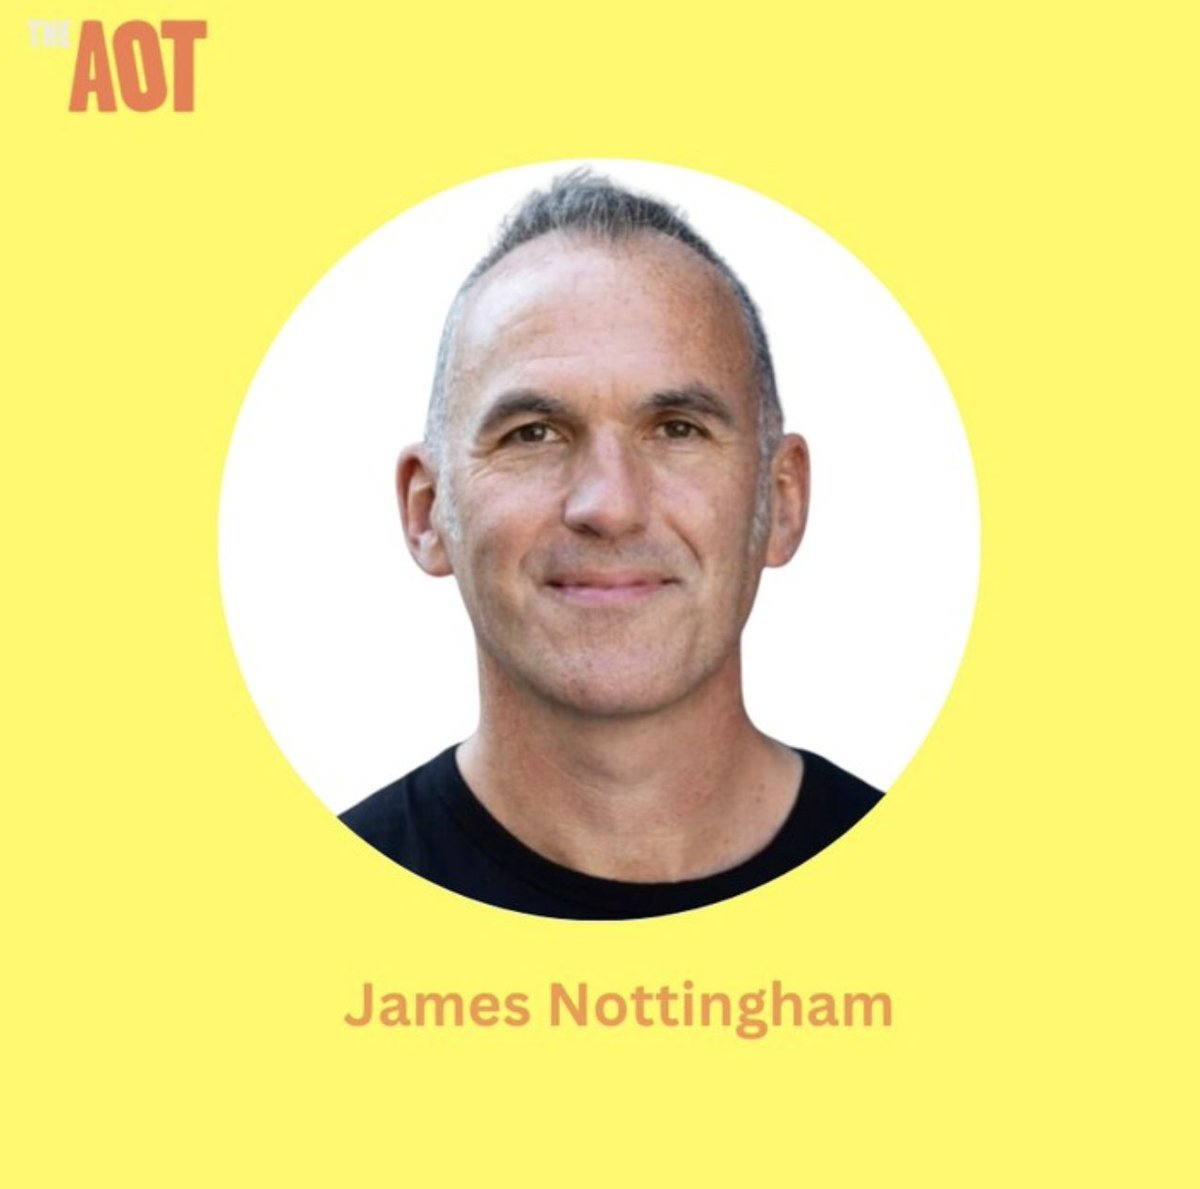 Here is a snippet from my chat with the amazing @JamesNottinghm Nottingham. James Nottingham is the creator of the @TheLearningPit. We talked about insights from pig farming and how a trip to South Africa changed his life. Enjoy.. shorturl.at/iDHJQ